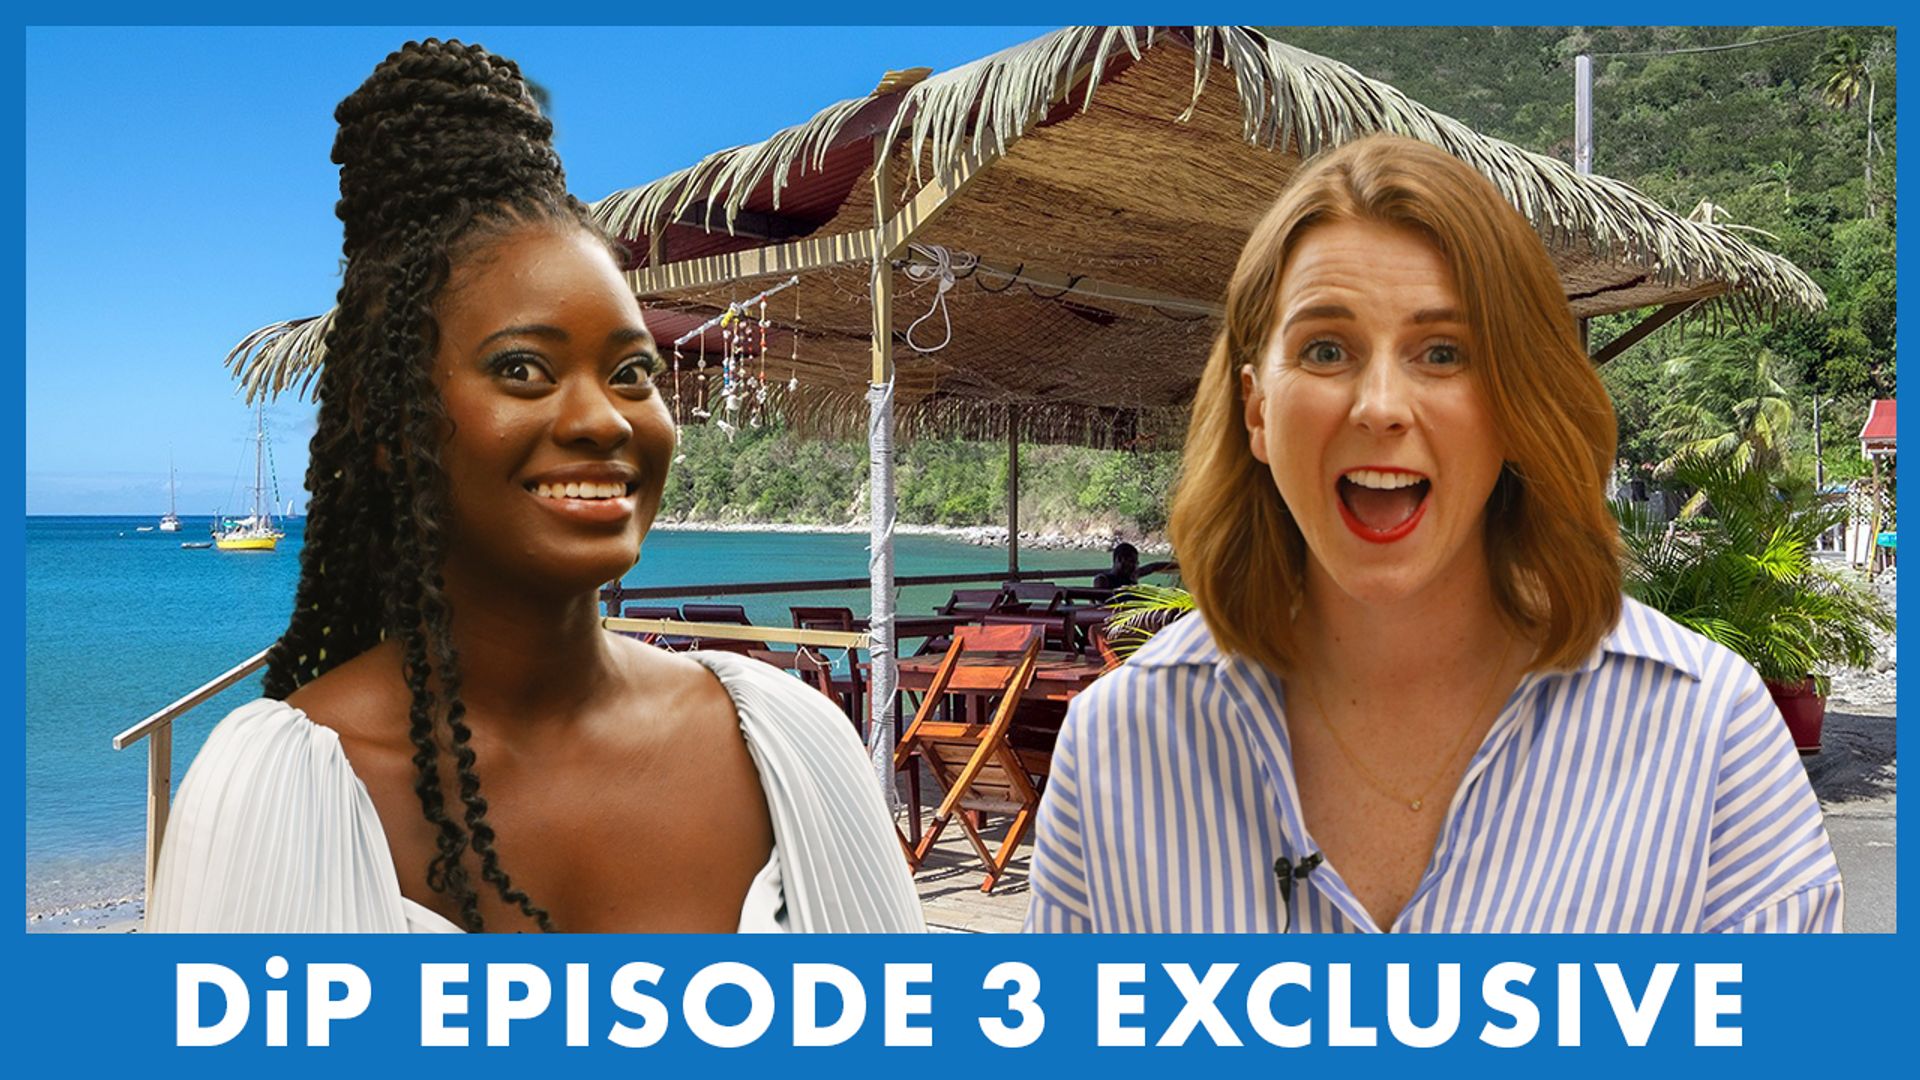 Death in Paradise star Shantol Jackson talks episode 3’s difficult storyline - exclusive